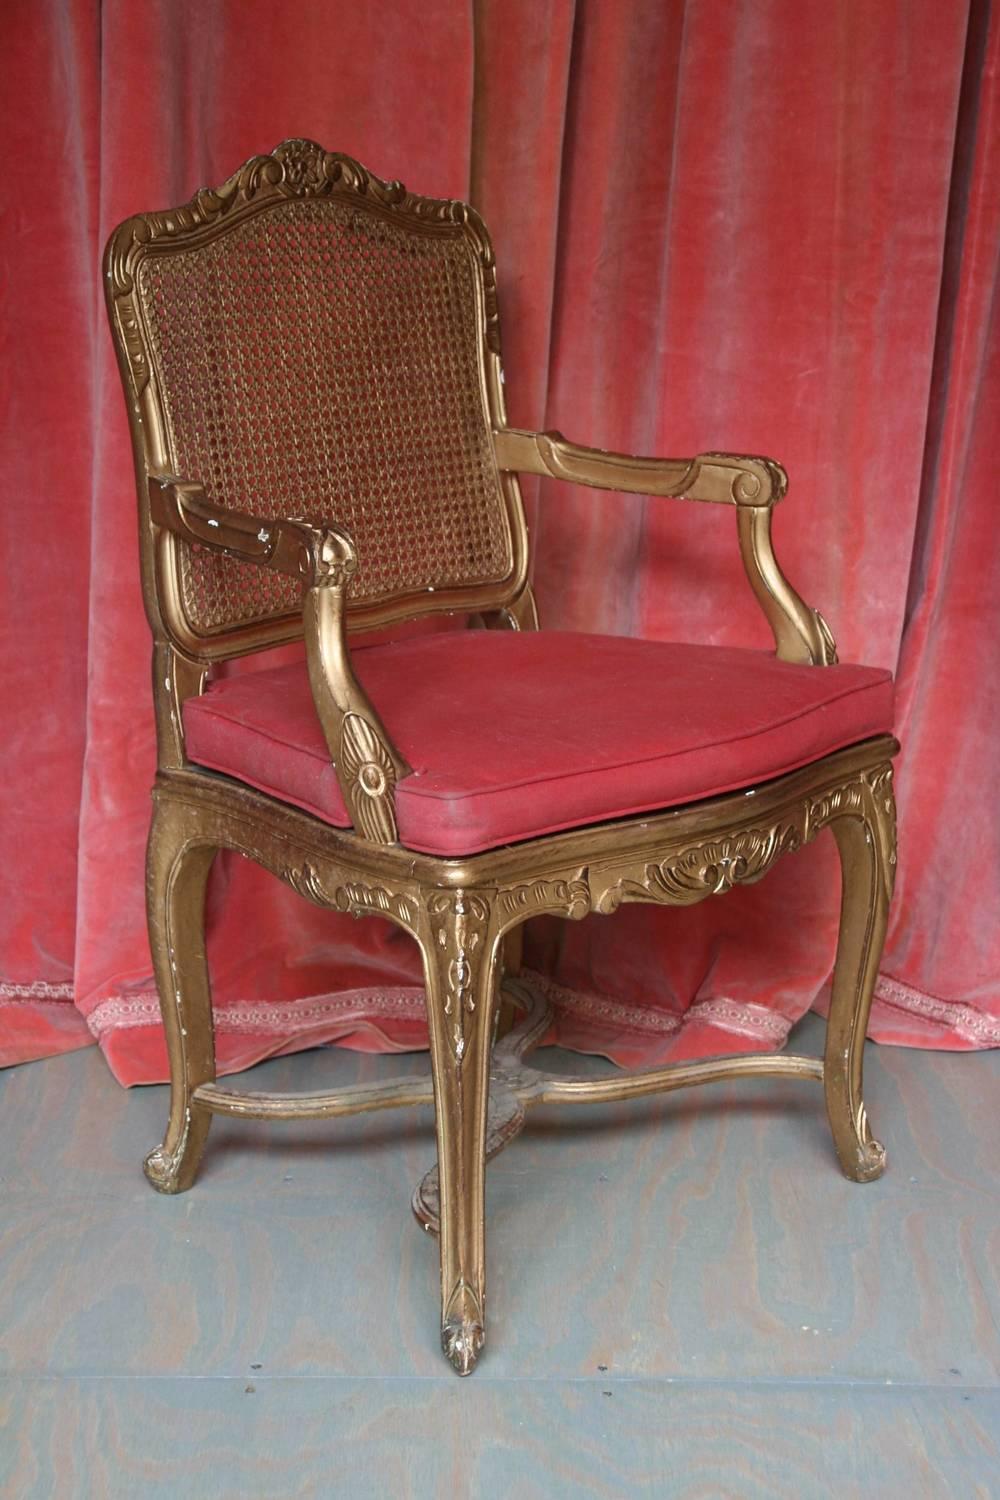 An exquisite Italian gilt Rococo style armchair. This beautiful armchair is crafted from the finest materials and designed with intricate attention to detail. Its stylish gold-painted frame perfectly accents the intricate details and decorative